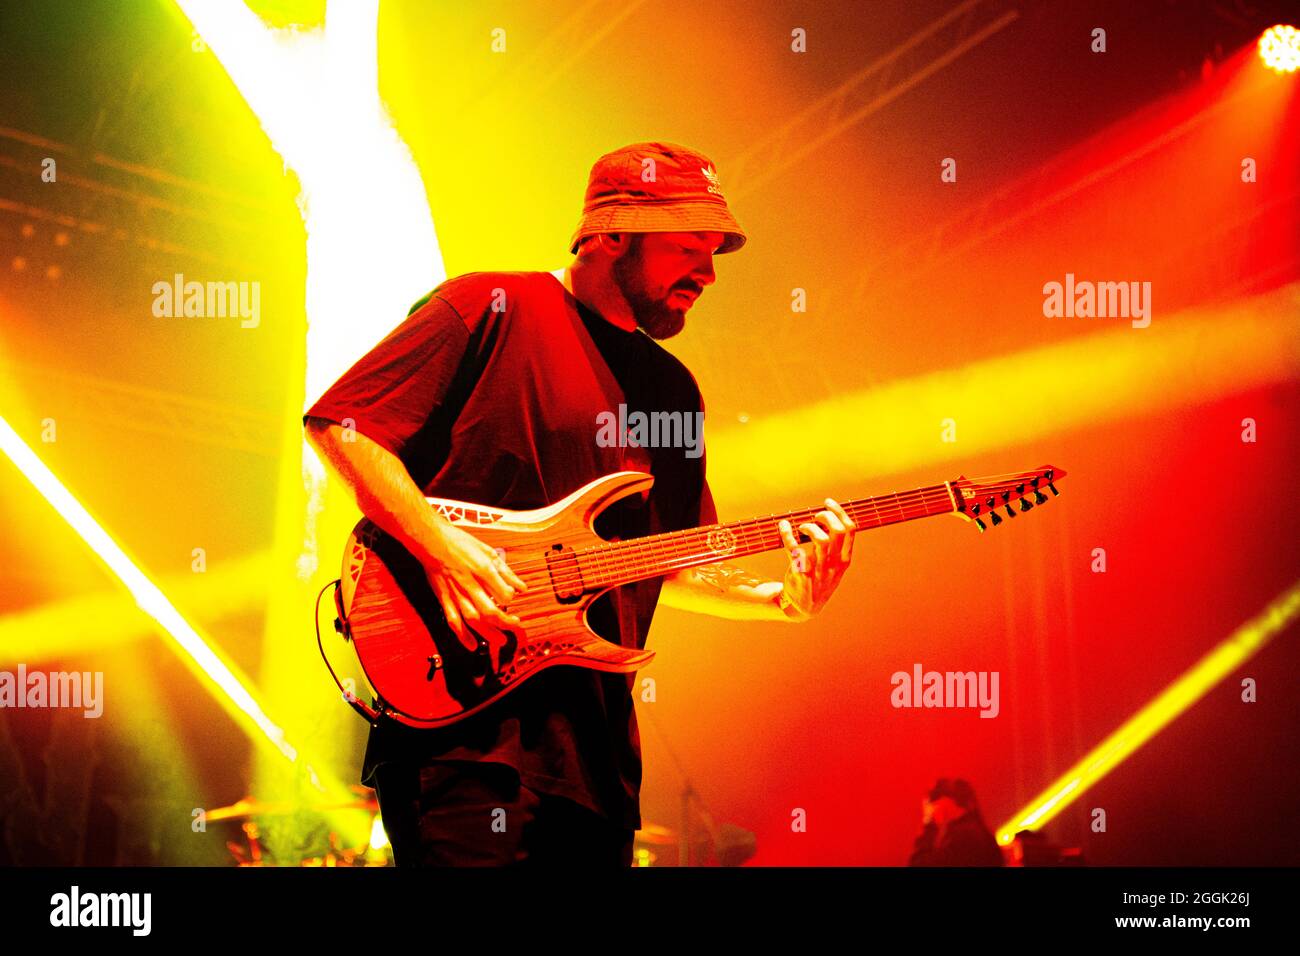 Cremona Italy 29 August 2021 - The Ukrainian heavy metal band Jinjer performs a live concert at Luppolo Rock © Andrea Ripamonti / Alamy Stock Photo